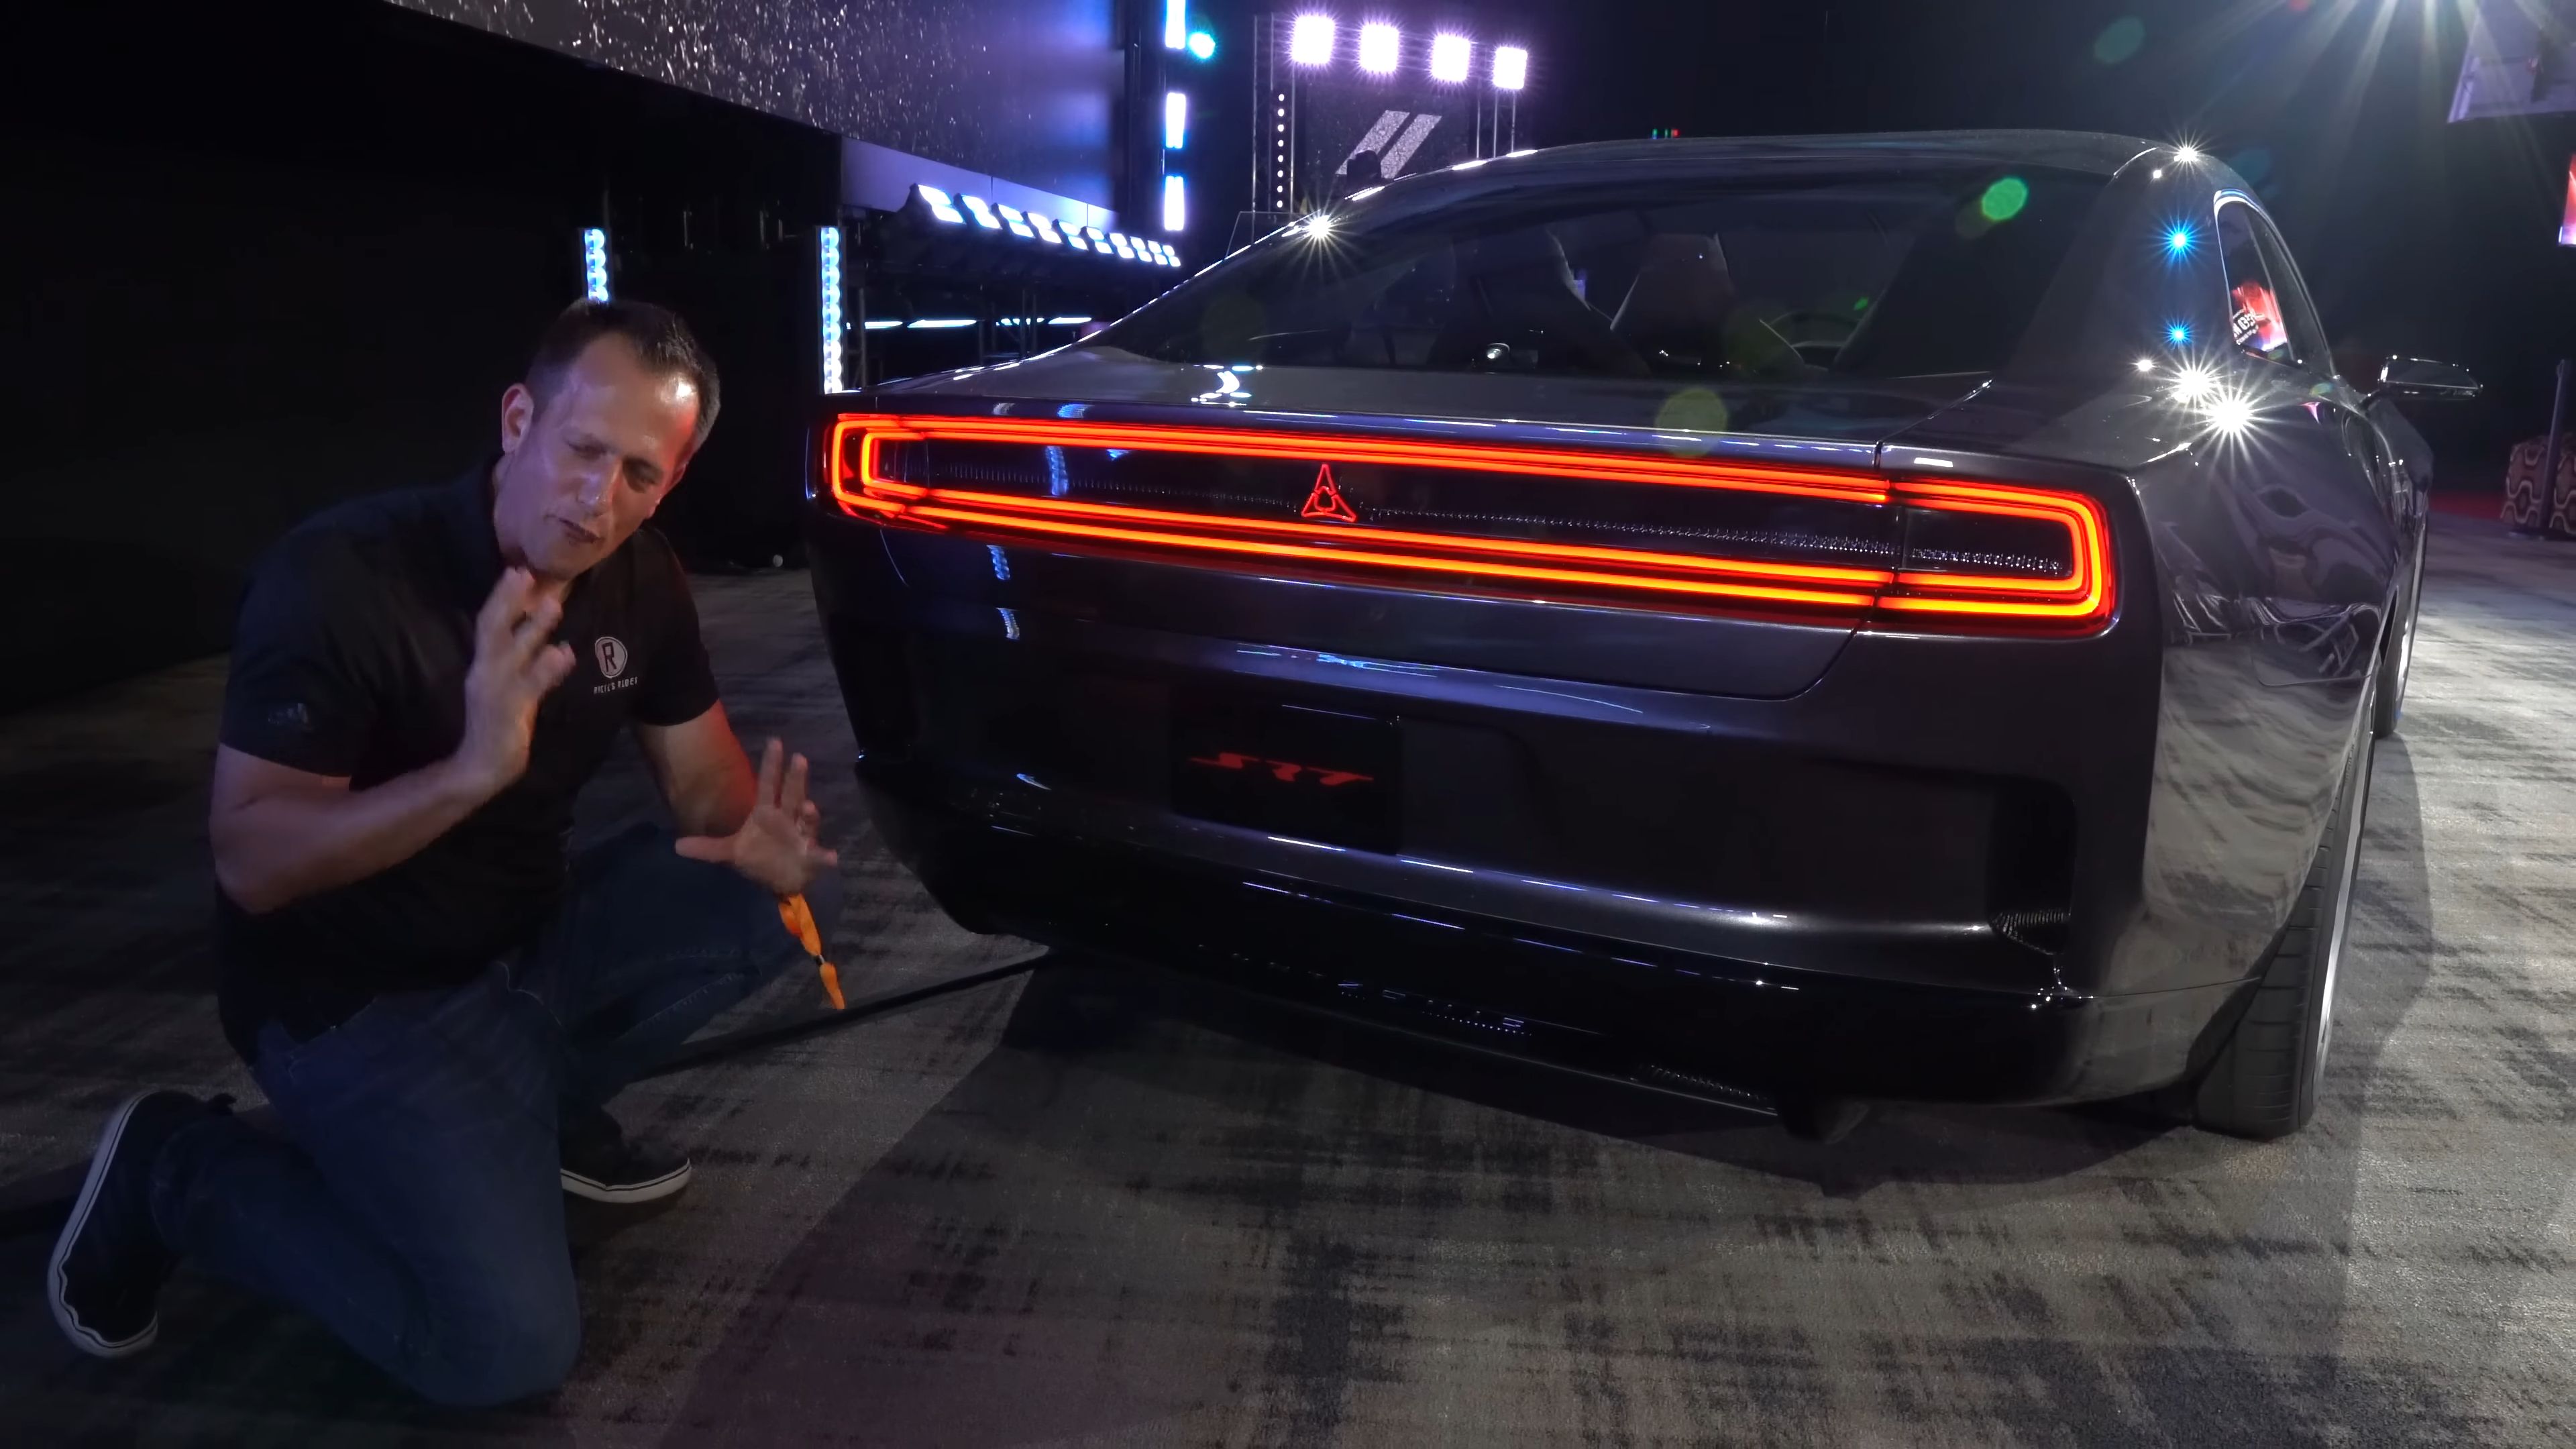 The 2024 Dodge Charger Daytona SRT Electric Muscle Car Features